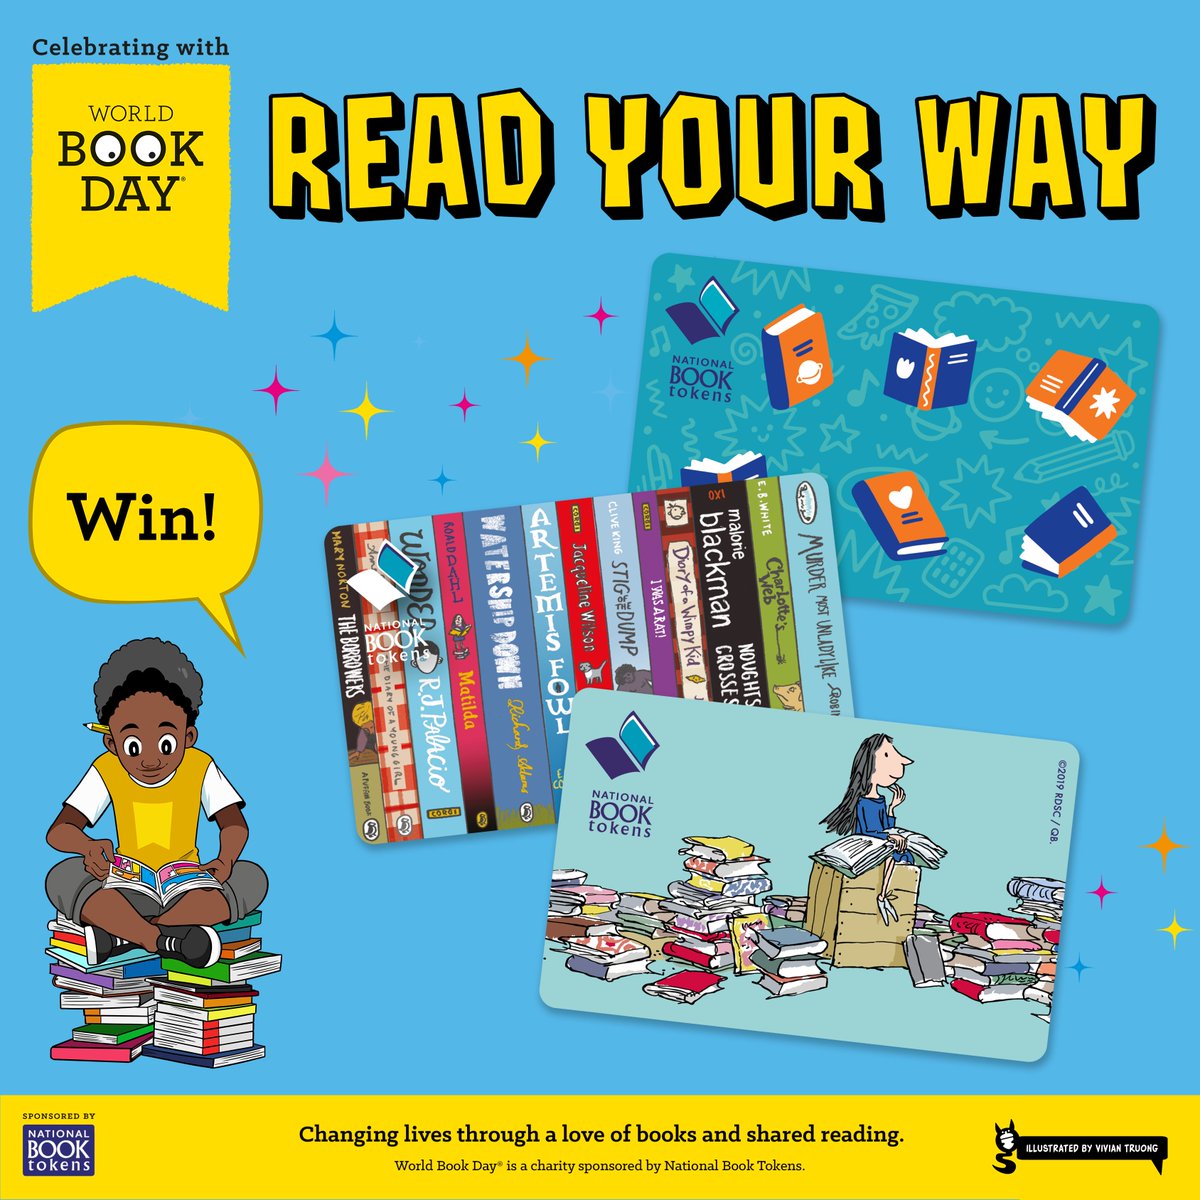 ✨WIN a £10/€12 National Book Token.✨ 'I used to dislike reading but when #WorldBookDay happened I LOVED IT.' We're proud to sponsor @WorldBookDayUK, a charity that changes lives through a love of books and reading. 👉Repost & follow @book_tokens by 3pm Fri. #ReadYourWay